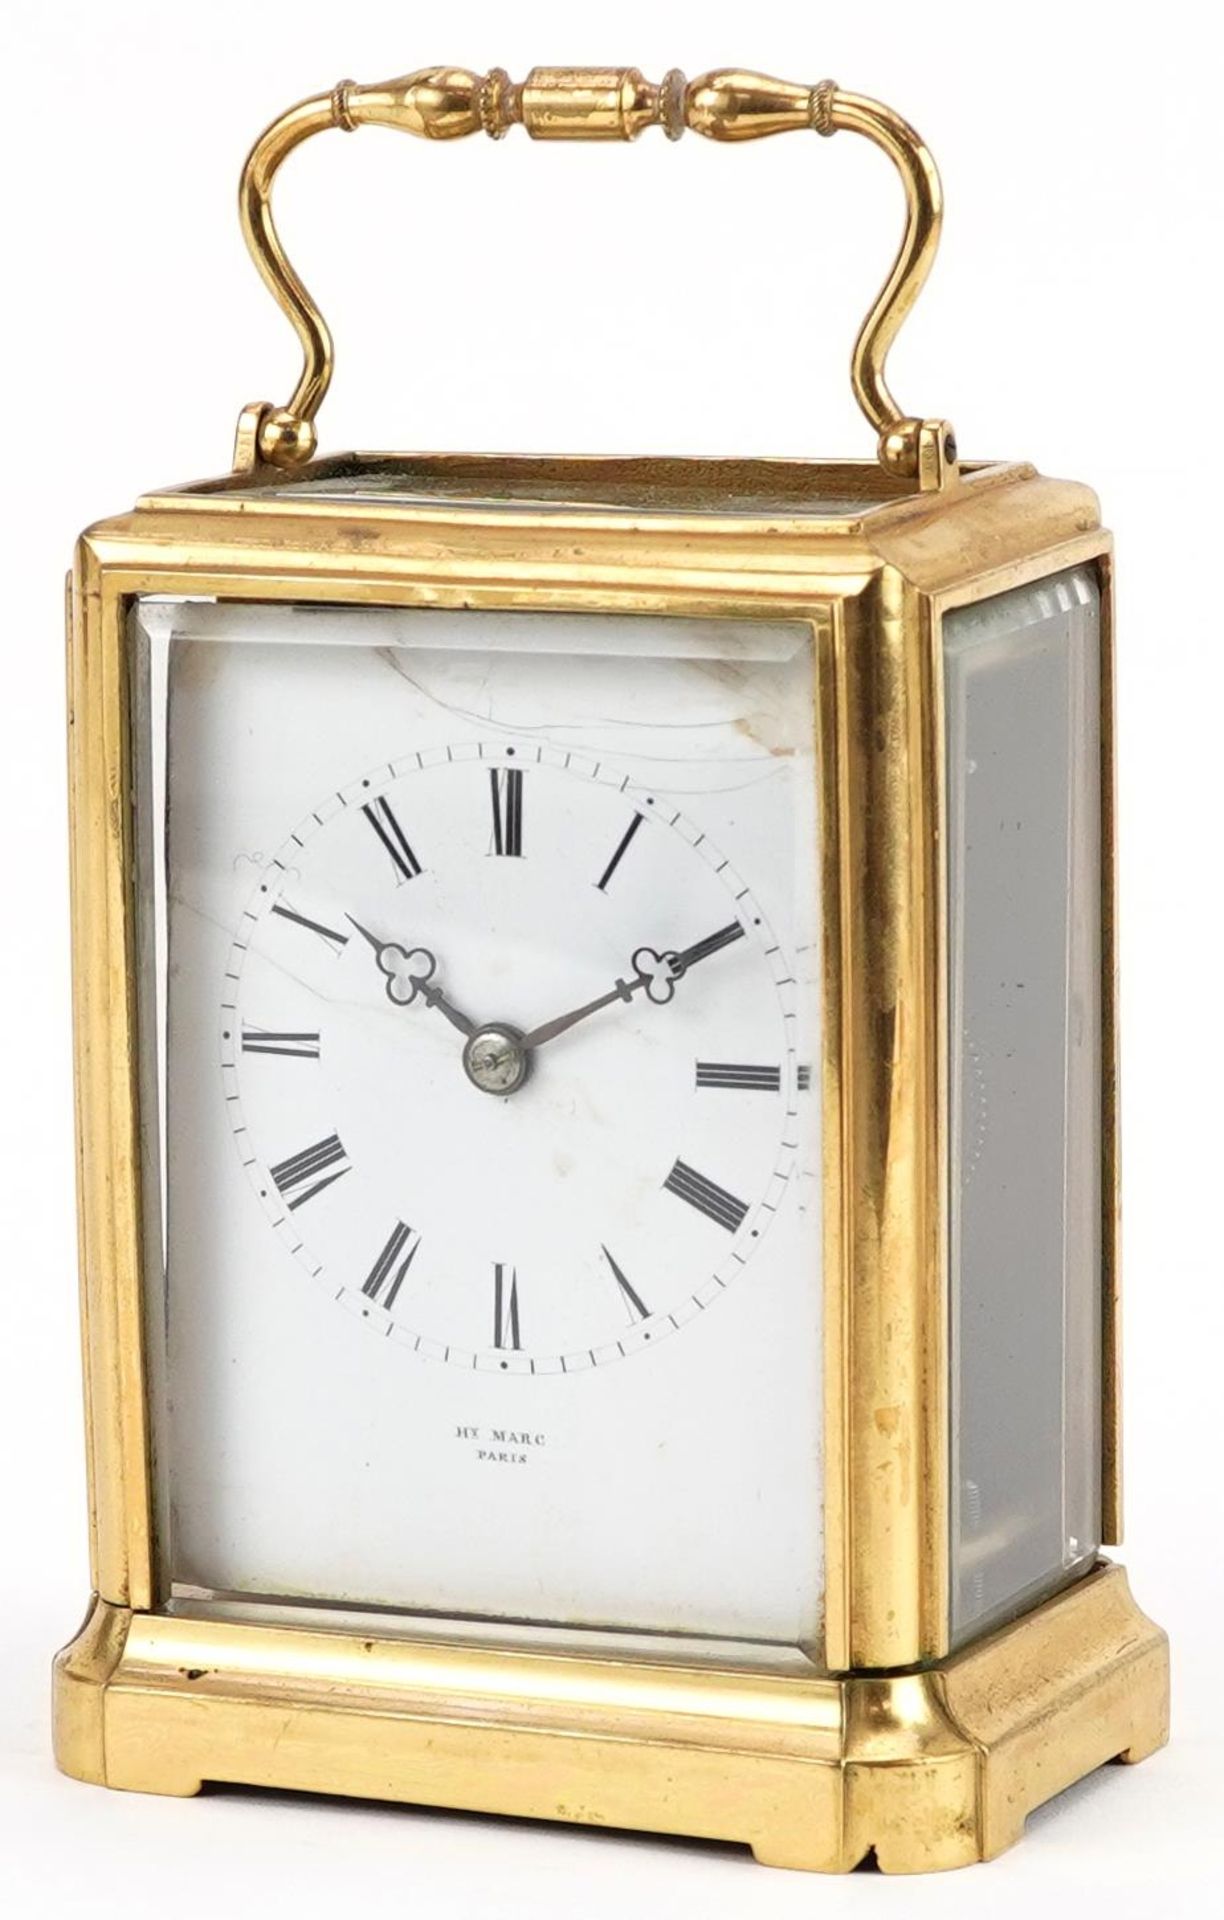 Henri Marc of Paris, 19th century French gilt brass carriage clock having enamelled dial with